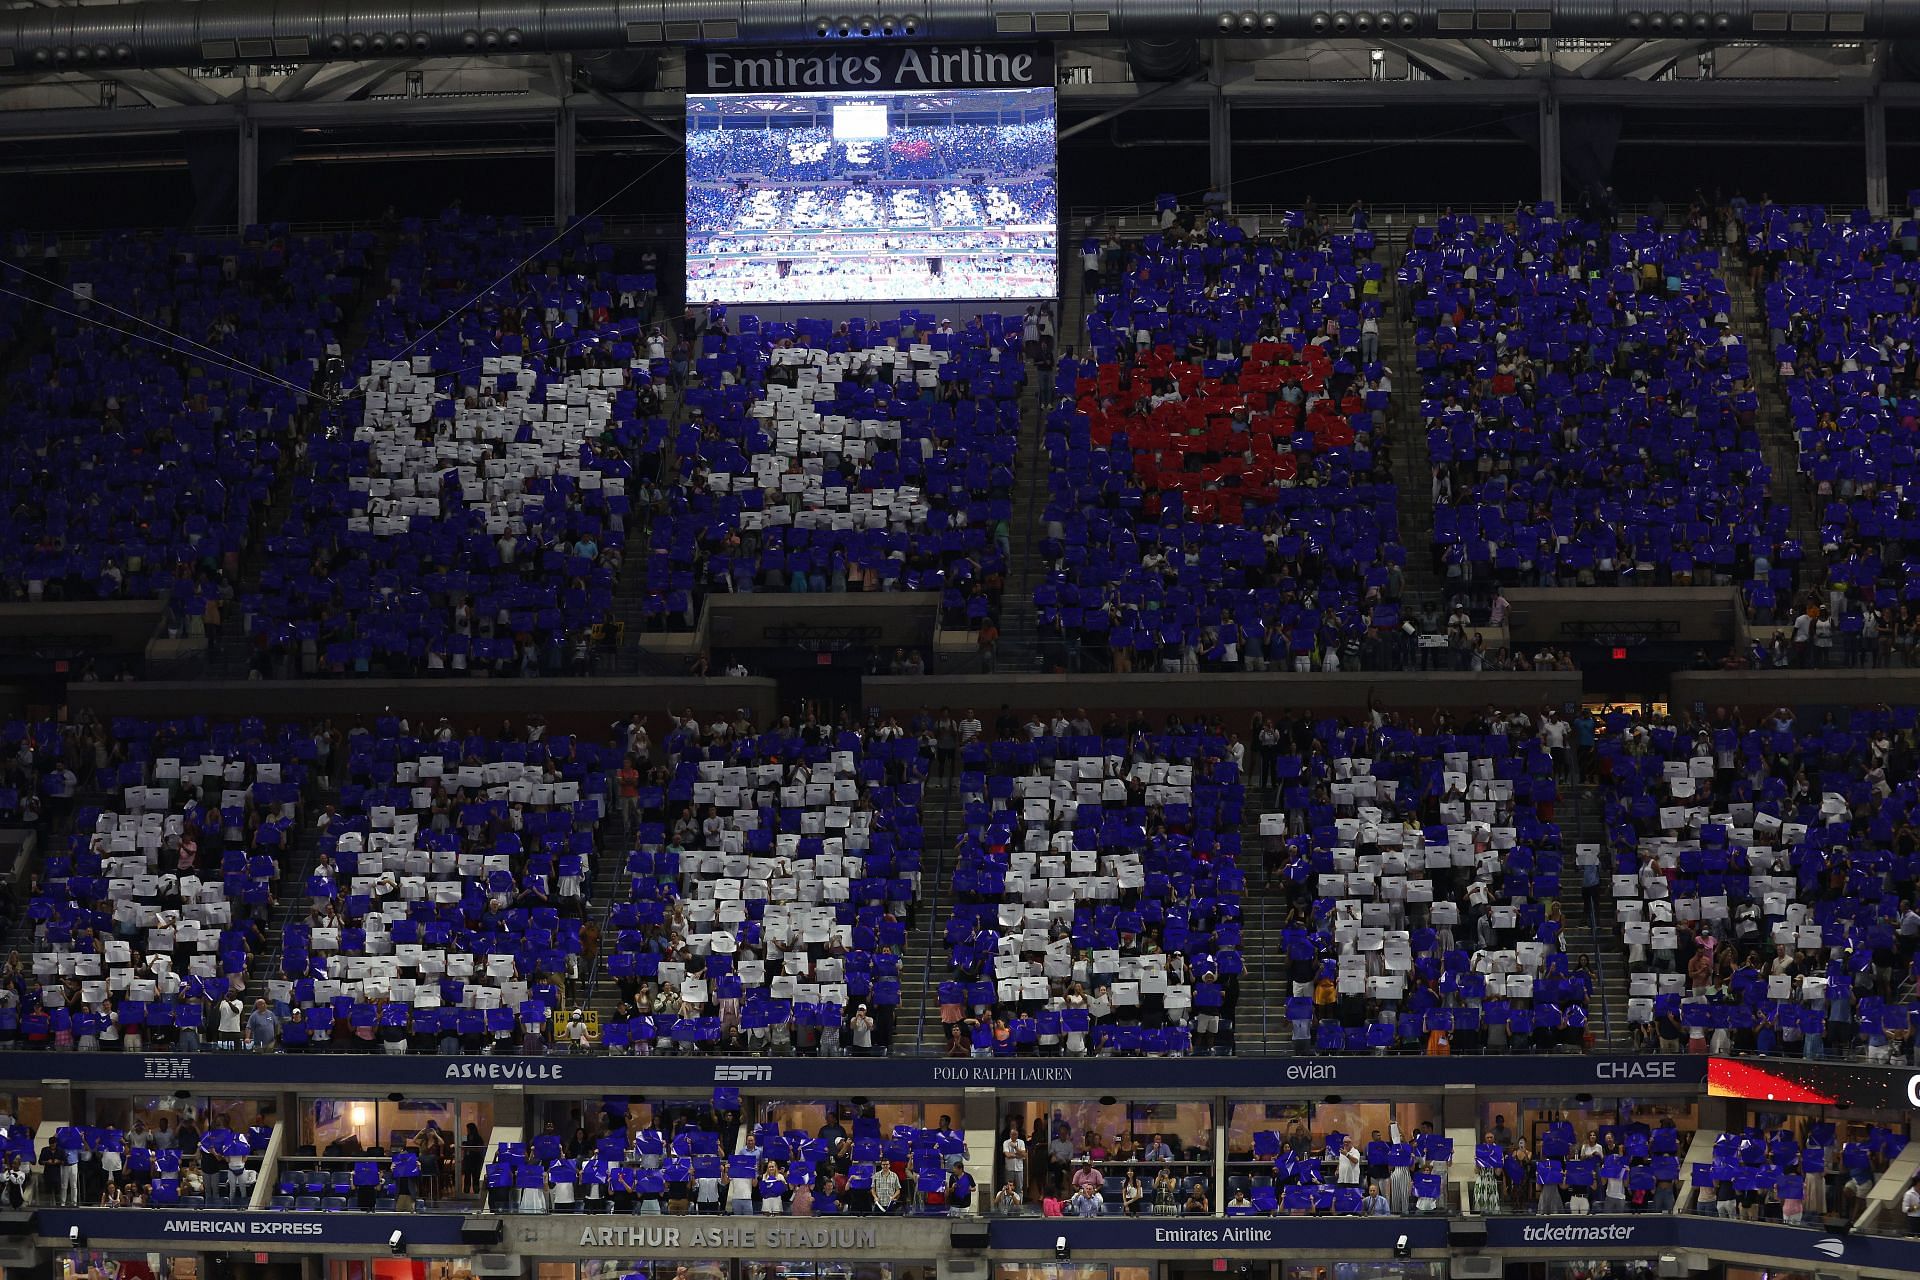 A card stunt honoring Serena Williams at the 2022 US Open.